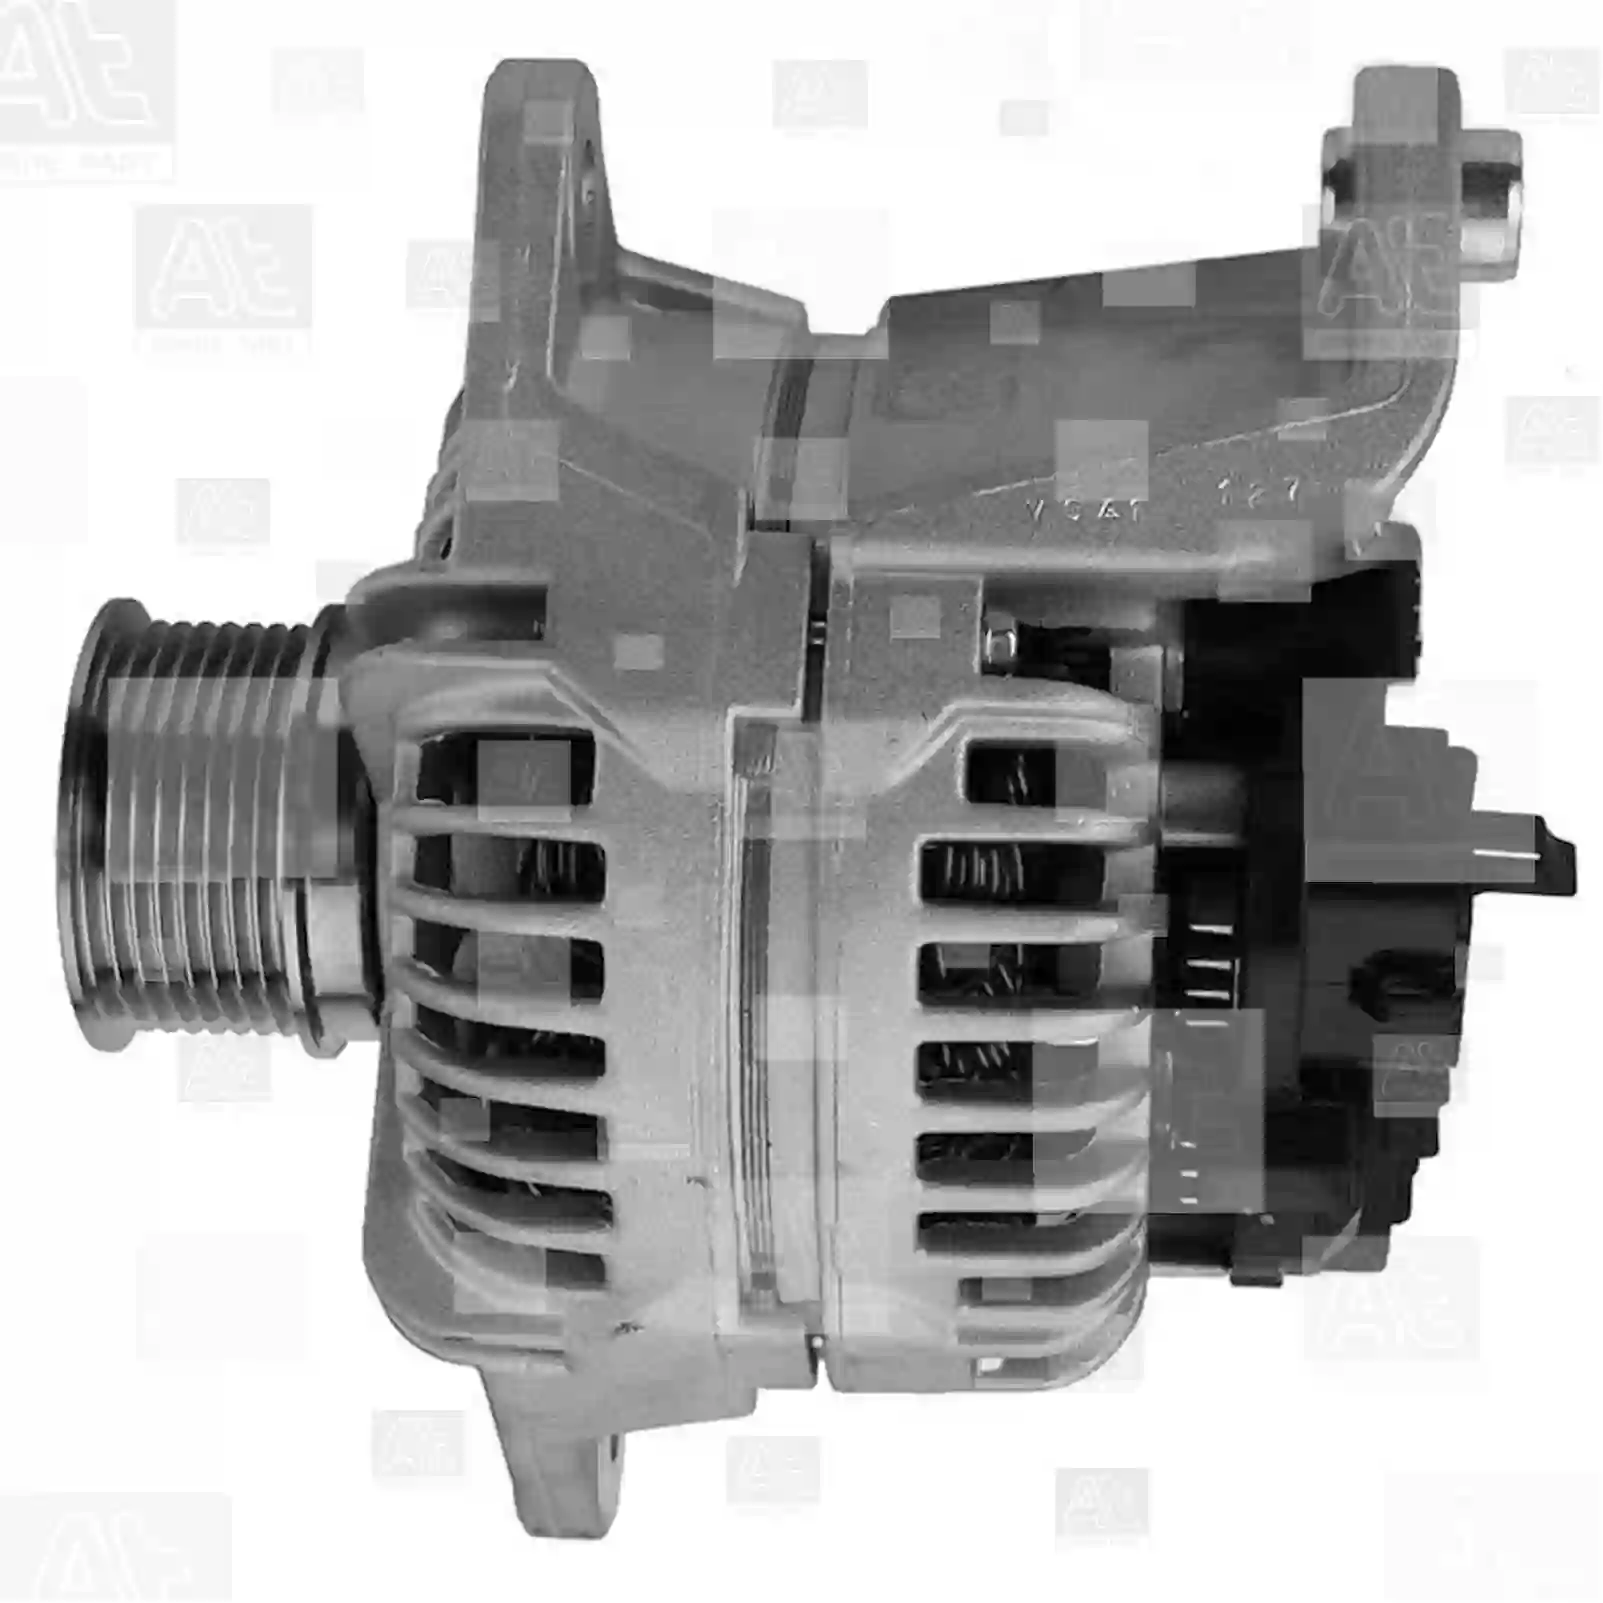 Alternator, 77710141, 1524012, 1524012A, 1524012R, 0020409228, 0020849349, 5001866291, 5010589525, 5010589555, 7420409228, 7420849351, 7420853850, 7421429786, 11170134, 11170321, 20409228, 20409240, 20489352, 20849349, 20849351, 21429783, 21429786, 3803639, 85000257, 85000419, 85003357, 85020820, 85020823, 85026820, 85026823, ZG20234-0008 ||  77710141 At Spare Part | Engine, Accelerator Pedal, Camshaft, Connecting Rod, Crankcase, Crankshaft, Cylinder Head, Engine Suspension Mountings, Exhaust Manifold, Exhaust Gas Recirculation, Filter Kits, Flywheel Housing, General Overhaul Kits, Engine, Intake Manifold, Oil Cleaner, Oil Cooler, Oil Filter, Oil Pump, Oil Sump, Piston & Liner, Sensor & Switch, Timing Case, Turbocharger, Cooling System, Belt Tensioner, Coolant Filter, Coolant Pipe, Corrosion Prevention Agent, Drive, Expansion Tank, Fan, Intercooler, Monitors & Gauges, Radiator, Thermostat, V-Belt / Timing belt, Water Pump, Fuel System, Electronical Injector Unit, Feed Pump, Fuel Filter, cpl., Fuel Gauge Sender,  Fuel Line, Fuel Pump, Fuel Tank, Injection Line Kit, Injection Pump, Exhaust System, Clutch & Pedal, Gearbox, Propeller Shaft, Axles, Brake System, Hubs & Wheels, Suspension, Leaf Spring, Universal Parts / Accessories, Steering, Electrical System, Cabin Alternator, 77710141, 1524012, 1524012A, 1524012R, 0020409228, 0020849349, 5001866291, 5010589525, 5010589555, 7420409228, 7420849351, 7420853850, 7421429786, 11170134, 11170321, 20409228, 20409240, 20489352, 20849349, 20849351, 21429783, 21429786, 3803639, 85000257, 85000419, 85003357, 85020820, 85020823, 85026820, 85026823, ZG20234-0008 ||  77710141 At Spare Part | Engine, Accelerator Pedal, Camshaft, Connecting Rod, Crankcase, Crankshaft, Cylinder Head, Engine Suspension Mountings, Exhaust Manifold, Exhaust Gas Recirculation, Filter Kits, Flywheel Housing, General Overhaul Kits, Engine, Intake Manifold, Oil Cleaner, Oil Cooler, Oil Filter, Oil Pump, Oil Sump, Piston & Liner, Sensor & Switch, Timing Case, Turbocharger, Cooling System, Belt Tensioner, Coolant Filter, Coolant Pipe, Corrosion Prevention Agent, Drive, Expansion Tank, Fan, Intercooler, Monitors & Gauges, Radiator, Thermostat, V-Belt / Timing belt, Water Pump, Fuel System, Electronical Injector Unit, Feed Pump, Fuel Filter, cpl., Fuel Gauge Sender,  Fuel Line, Fuel Pump, Fuel Tank, Injection Line Kit, Injection Pump, Exhaust System, Clutch & Pedal, Gearbox, Propeller Shaft, Axles, Brake System, Hubs & Wheels, Suspension, Leaf Spring, Universal Parts / Accessories, Steering, Electrical System, Cabin